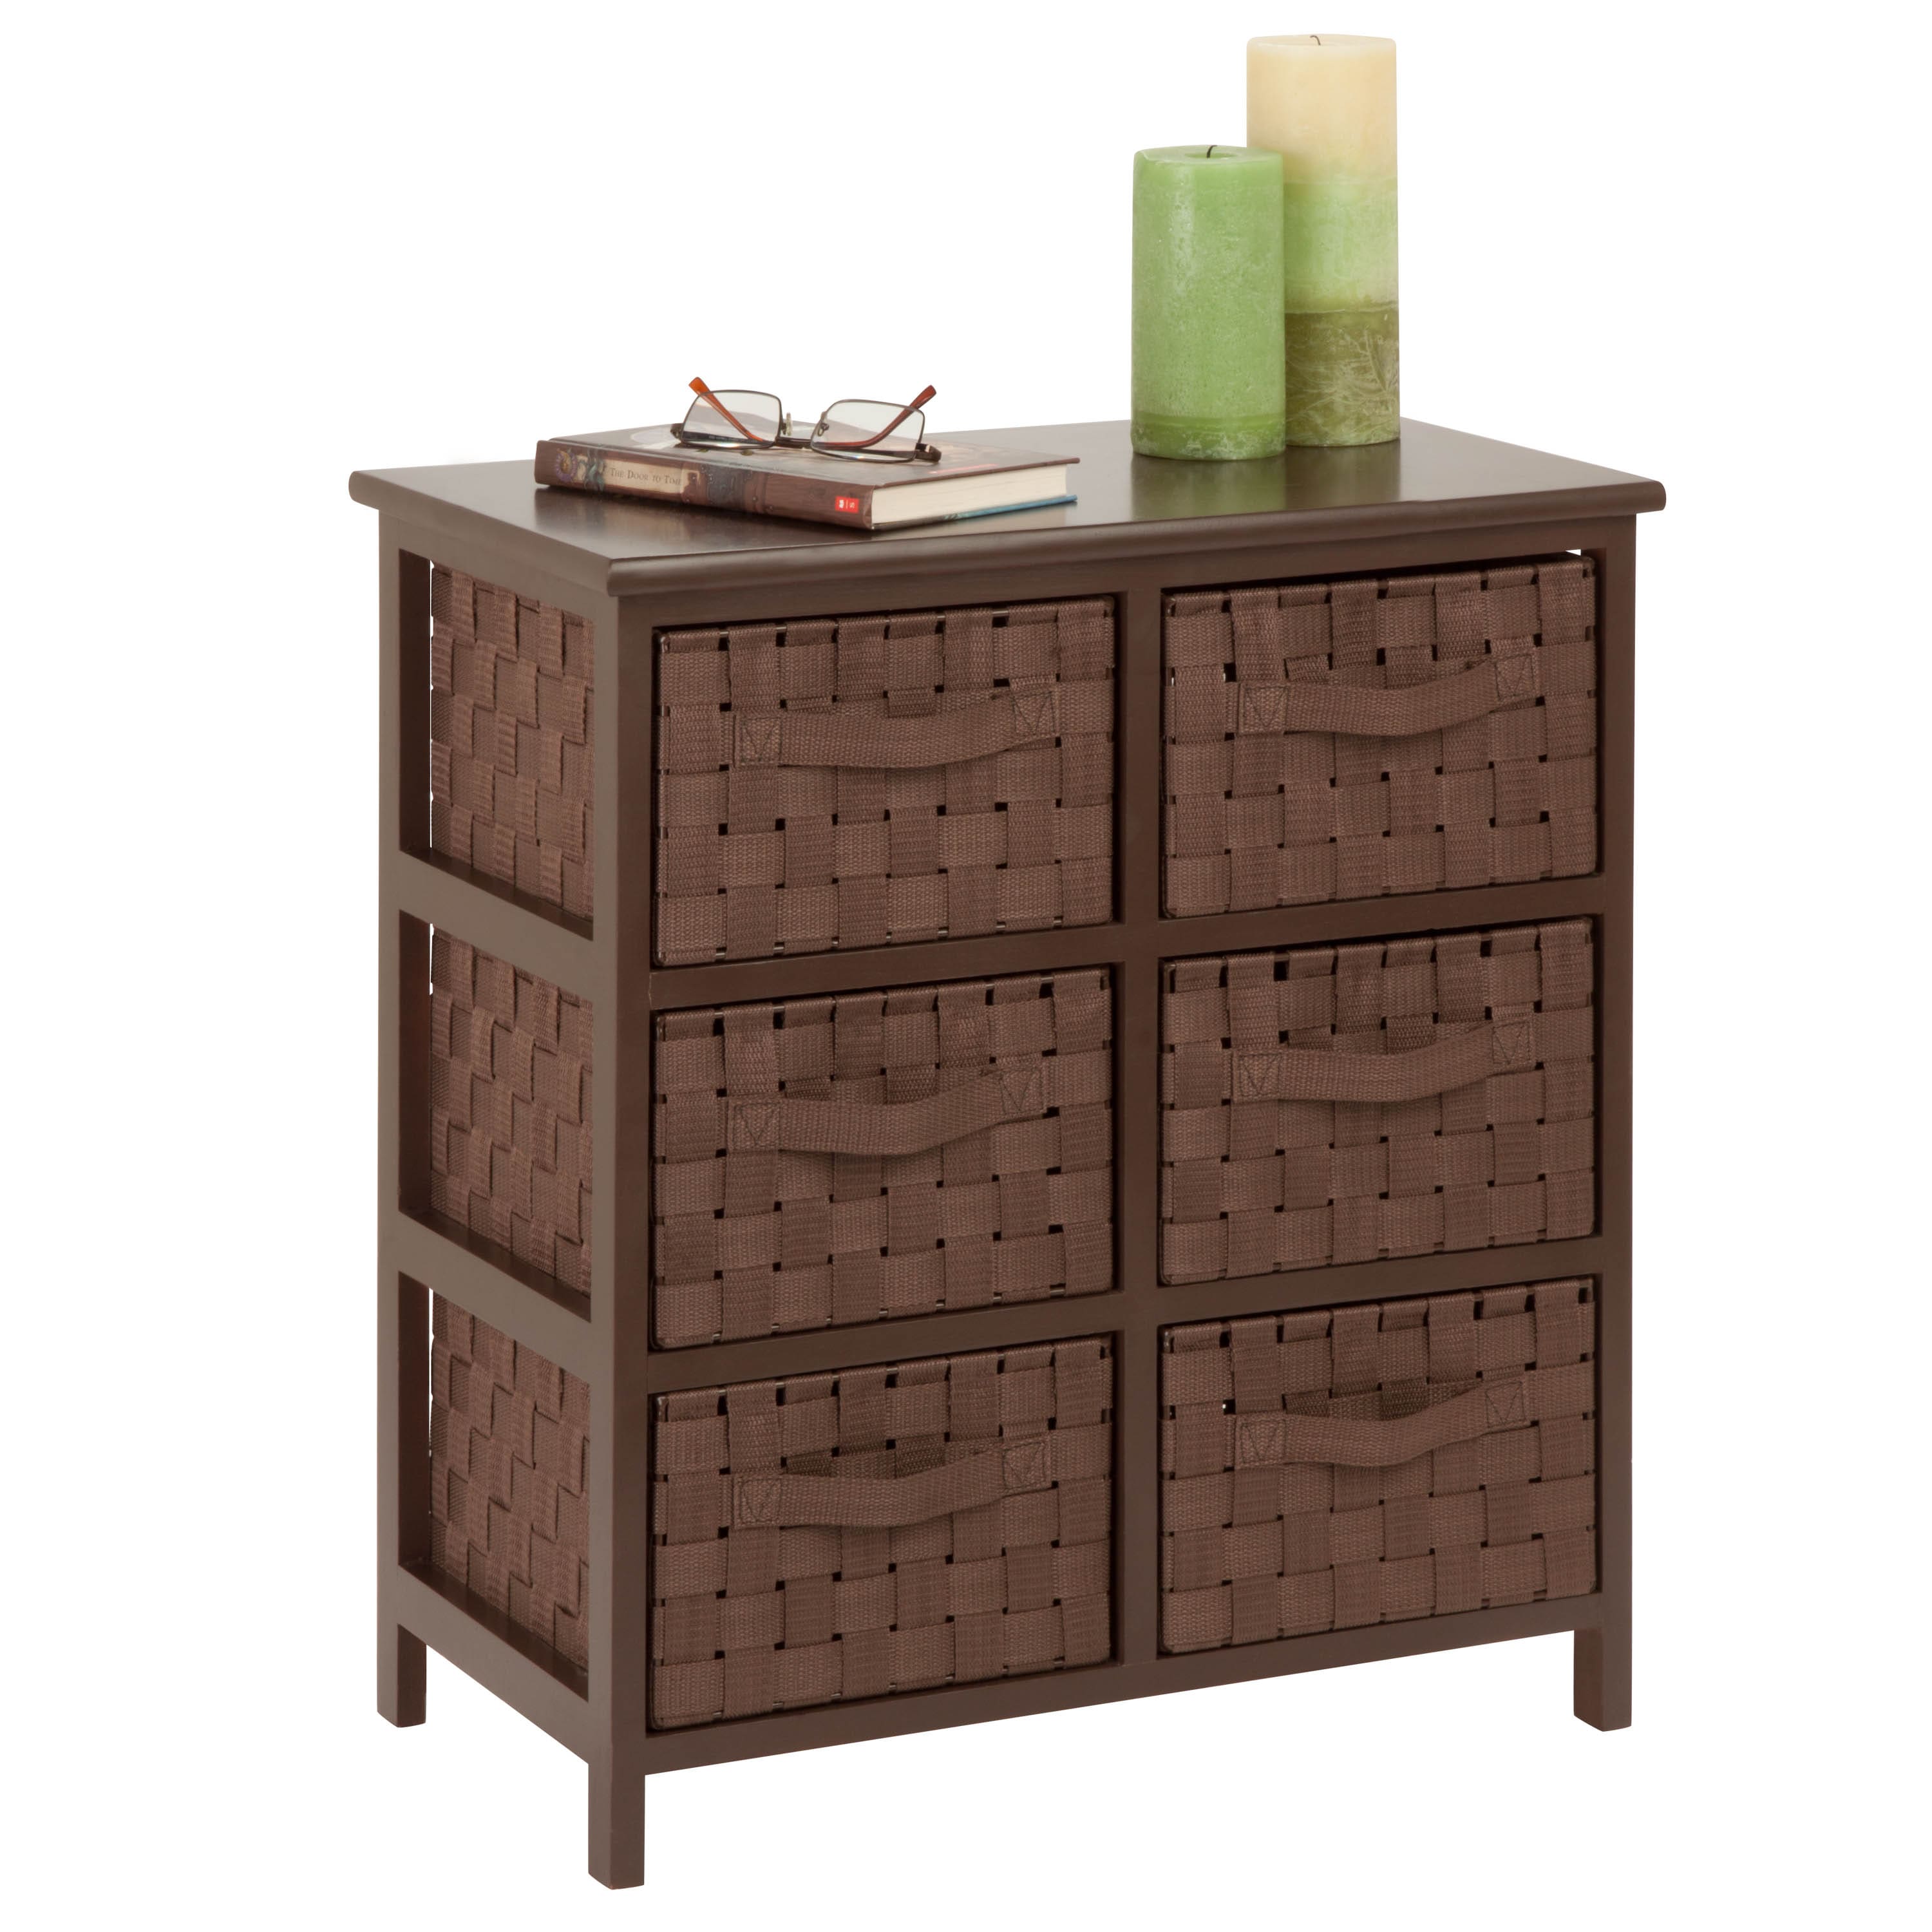 Honey Can Do Brown 6 Drawer Woven Strap Storage Chest